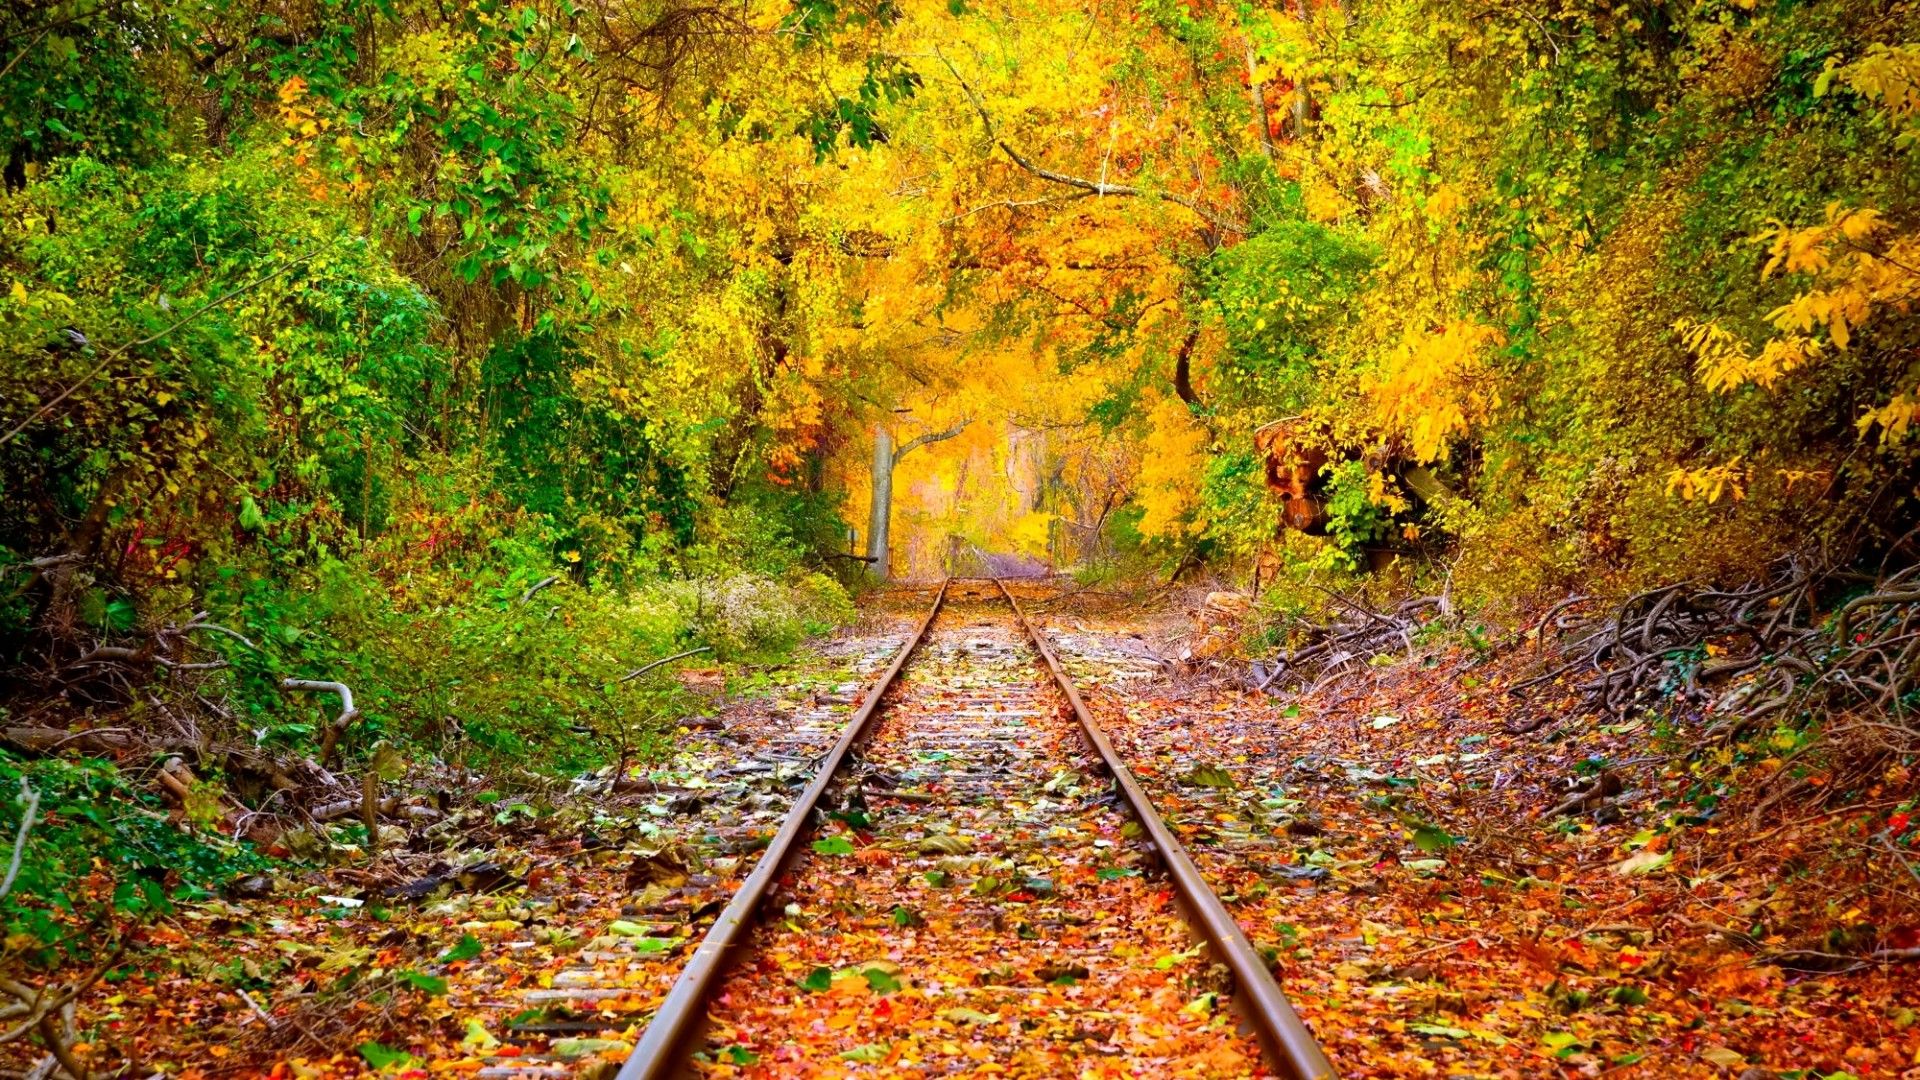 Download Wallpaper autumn foliage leaf rails railroad, 1920x Early autumn in an abandoned railway